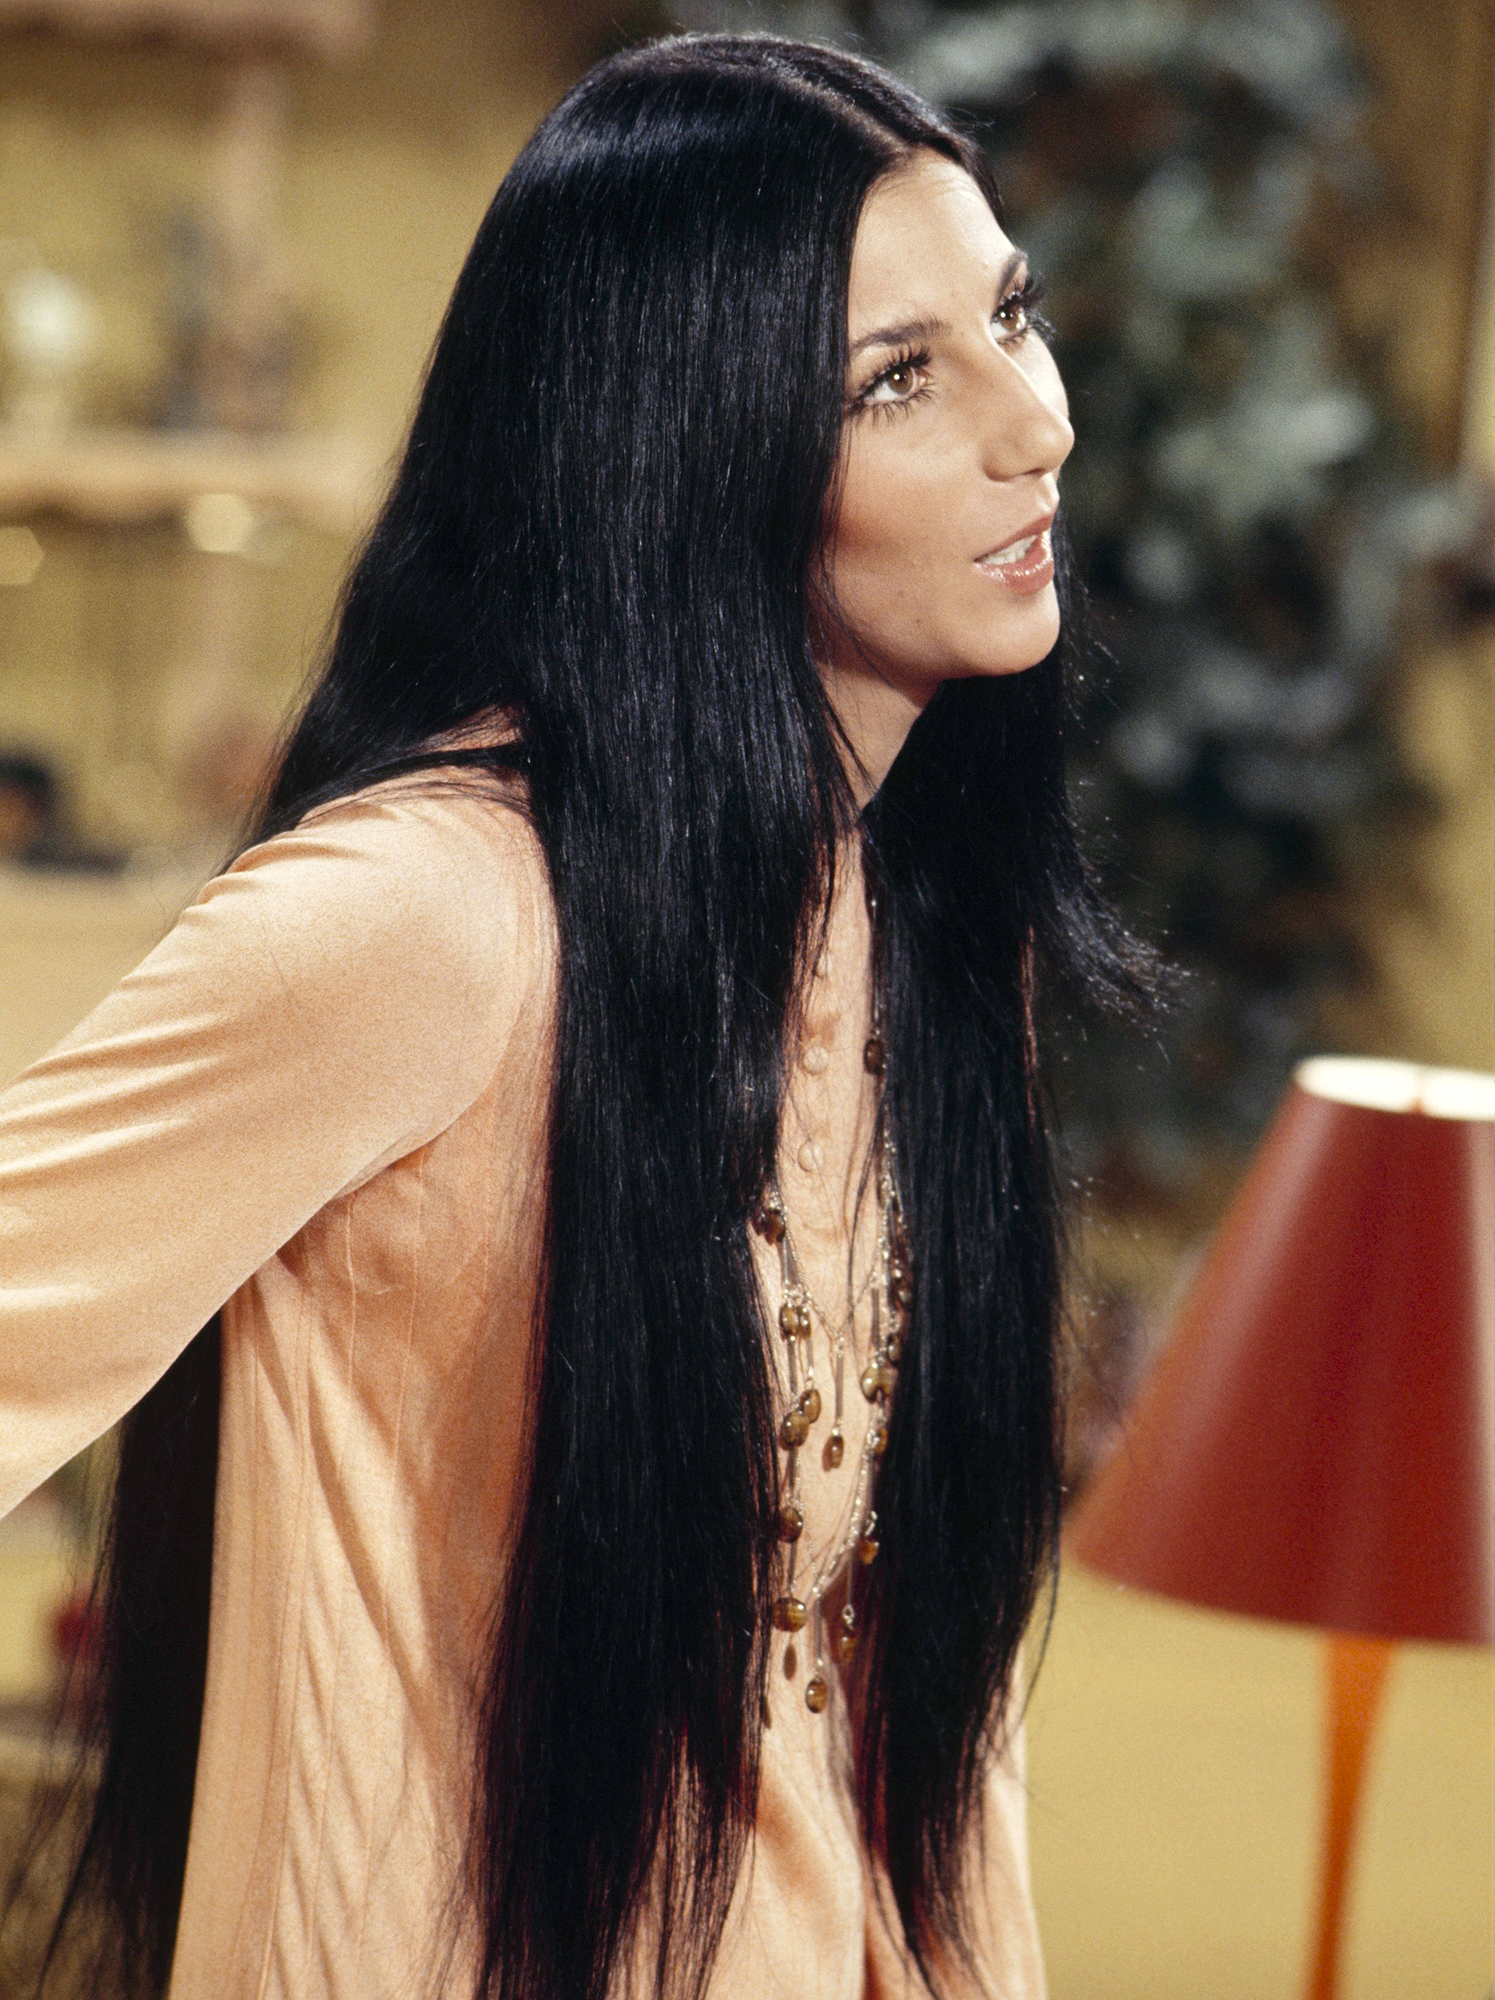 Cher on Aging and Her Iconic Career: 'I Thought I'd Be Dead ...